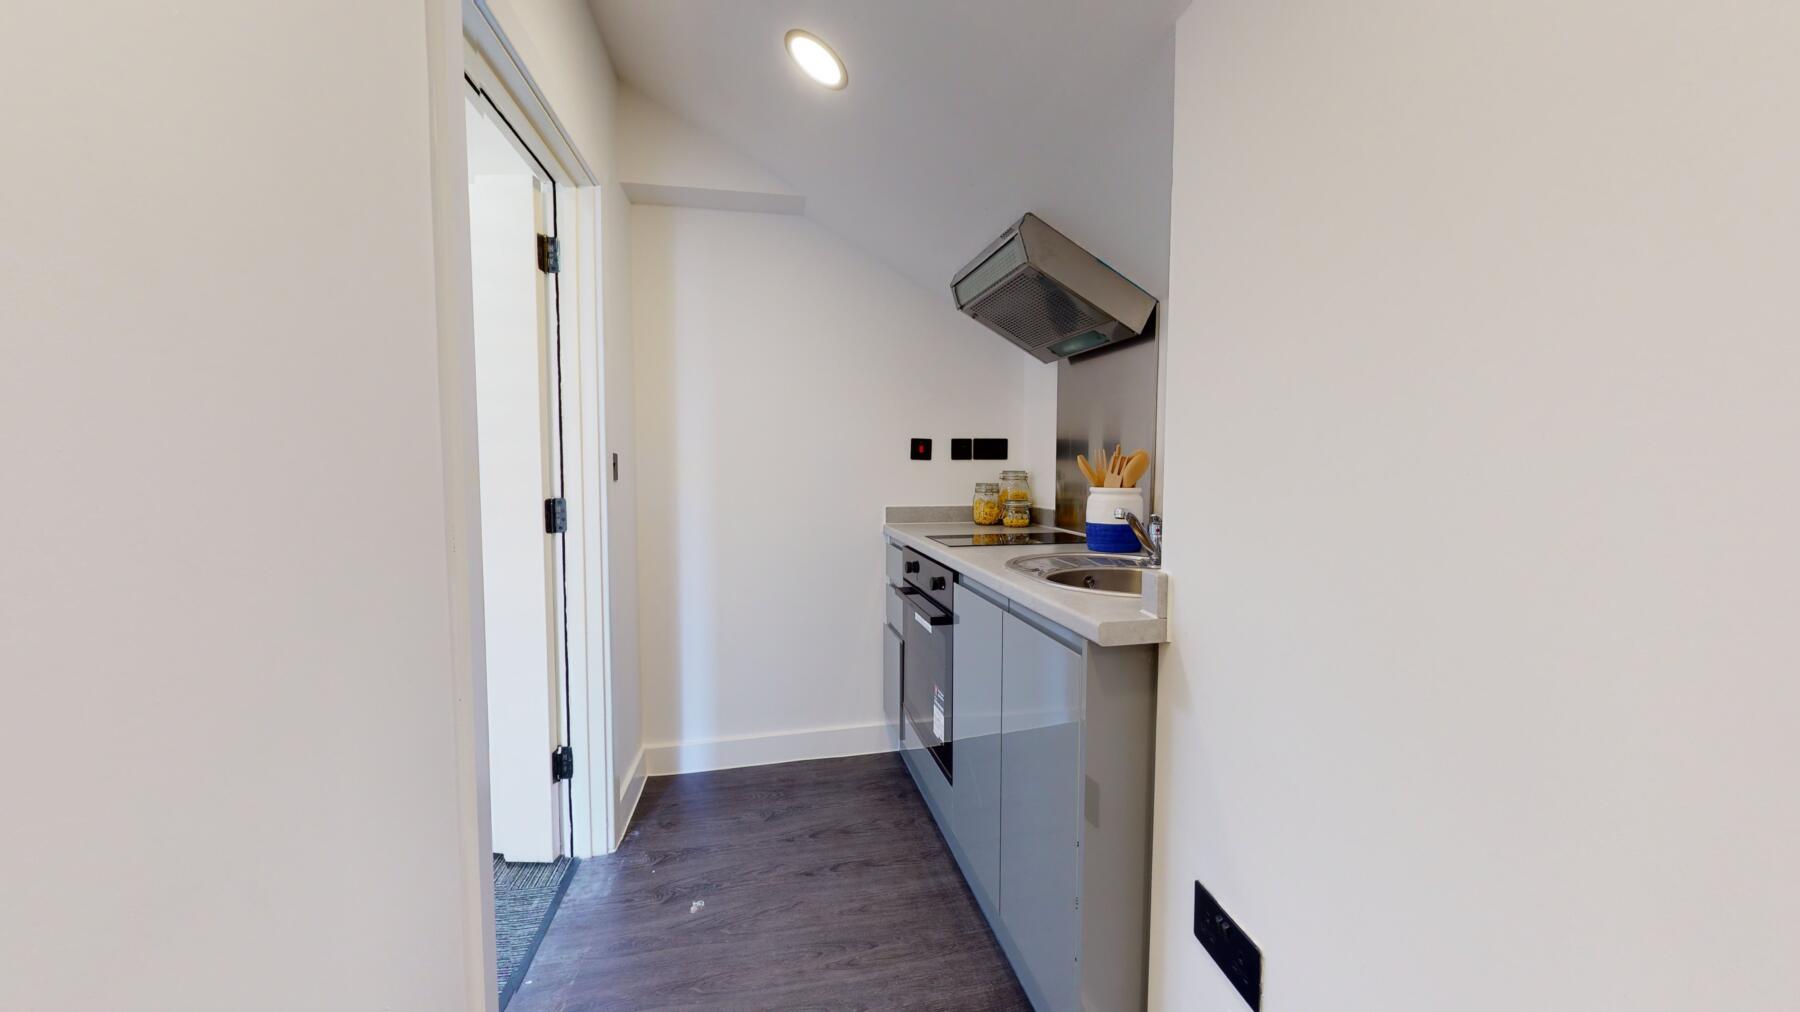 1 bed student accommodation in Nottingham · Available from 26th January 2022